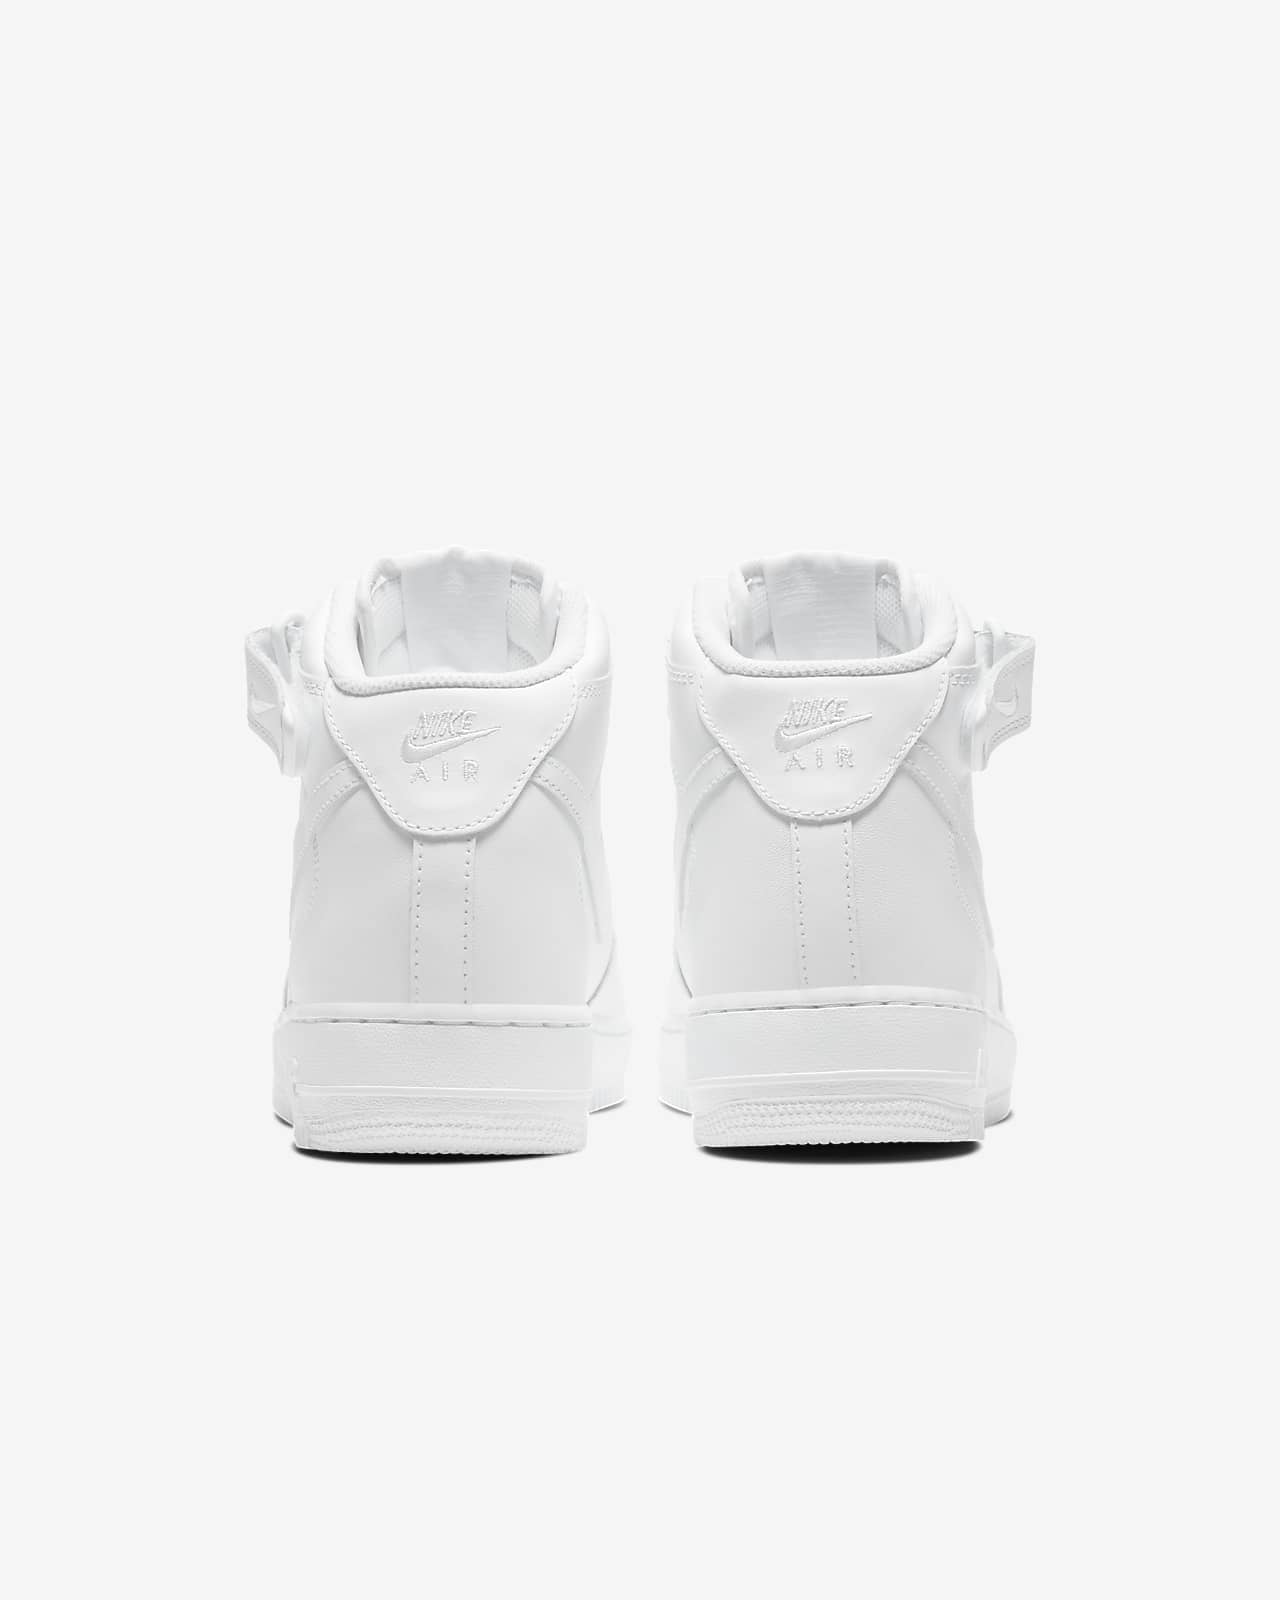 nike uptowns all white